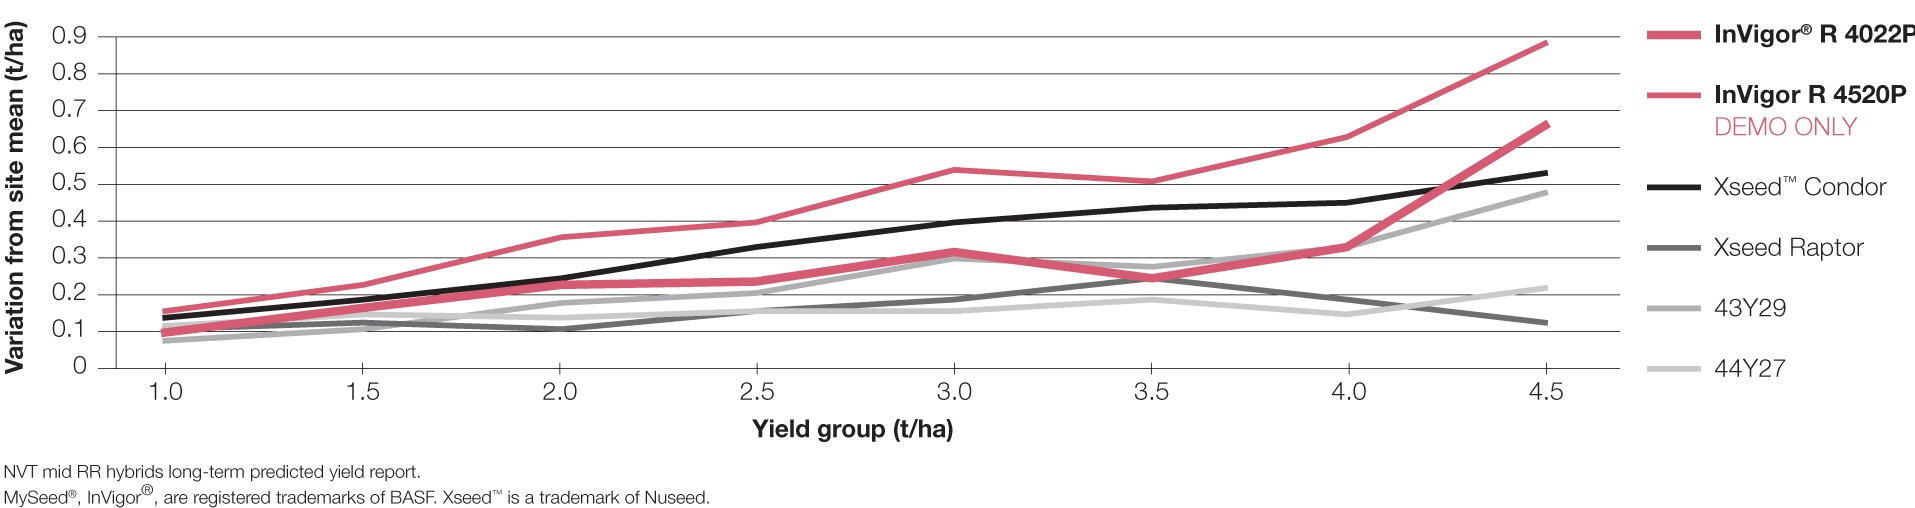 R4022P NVT-long-term-predicted-yield West